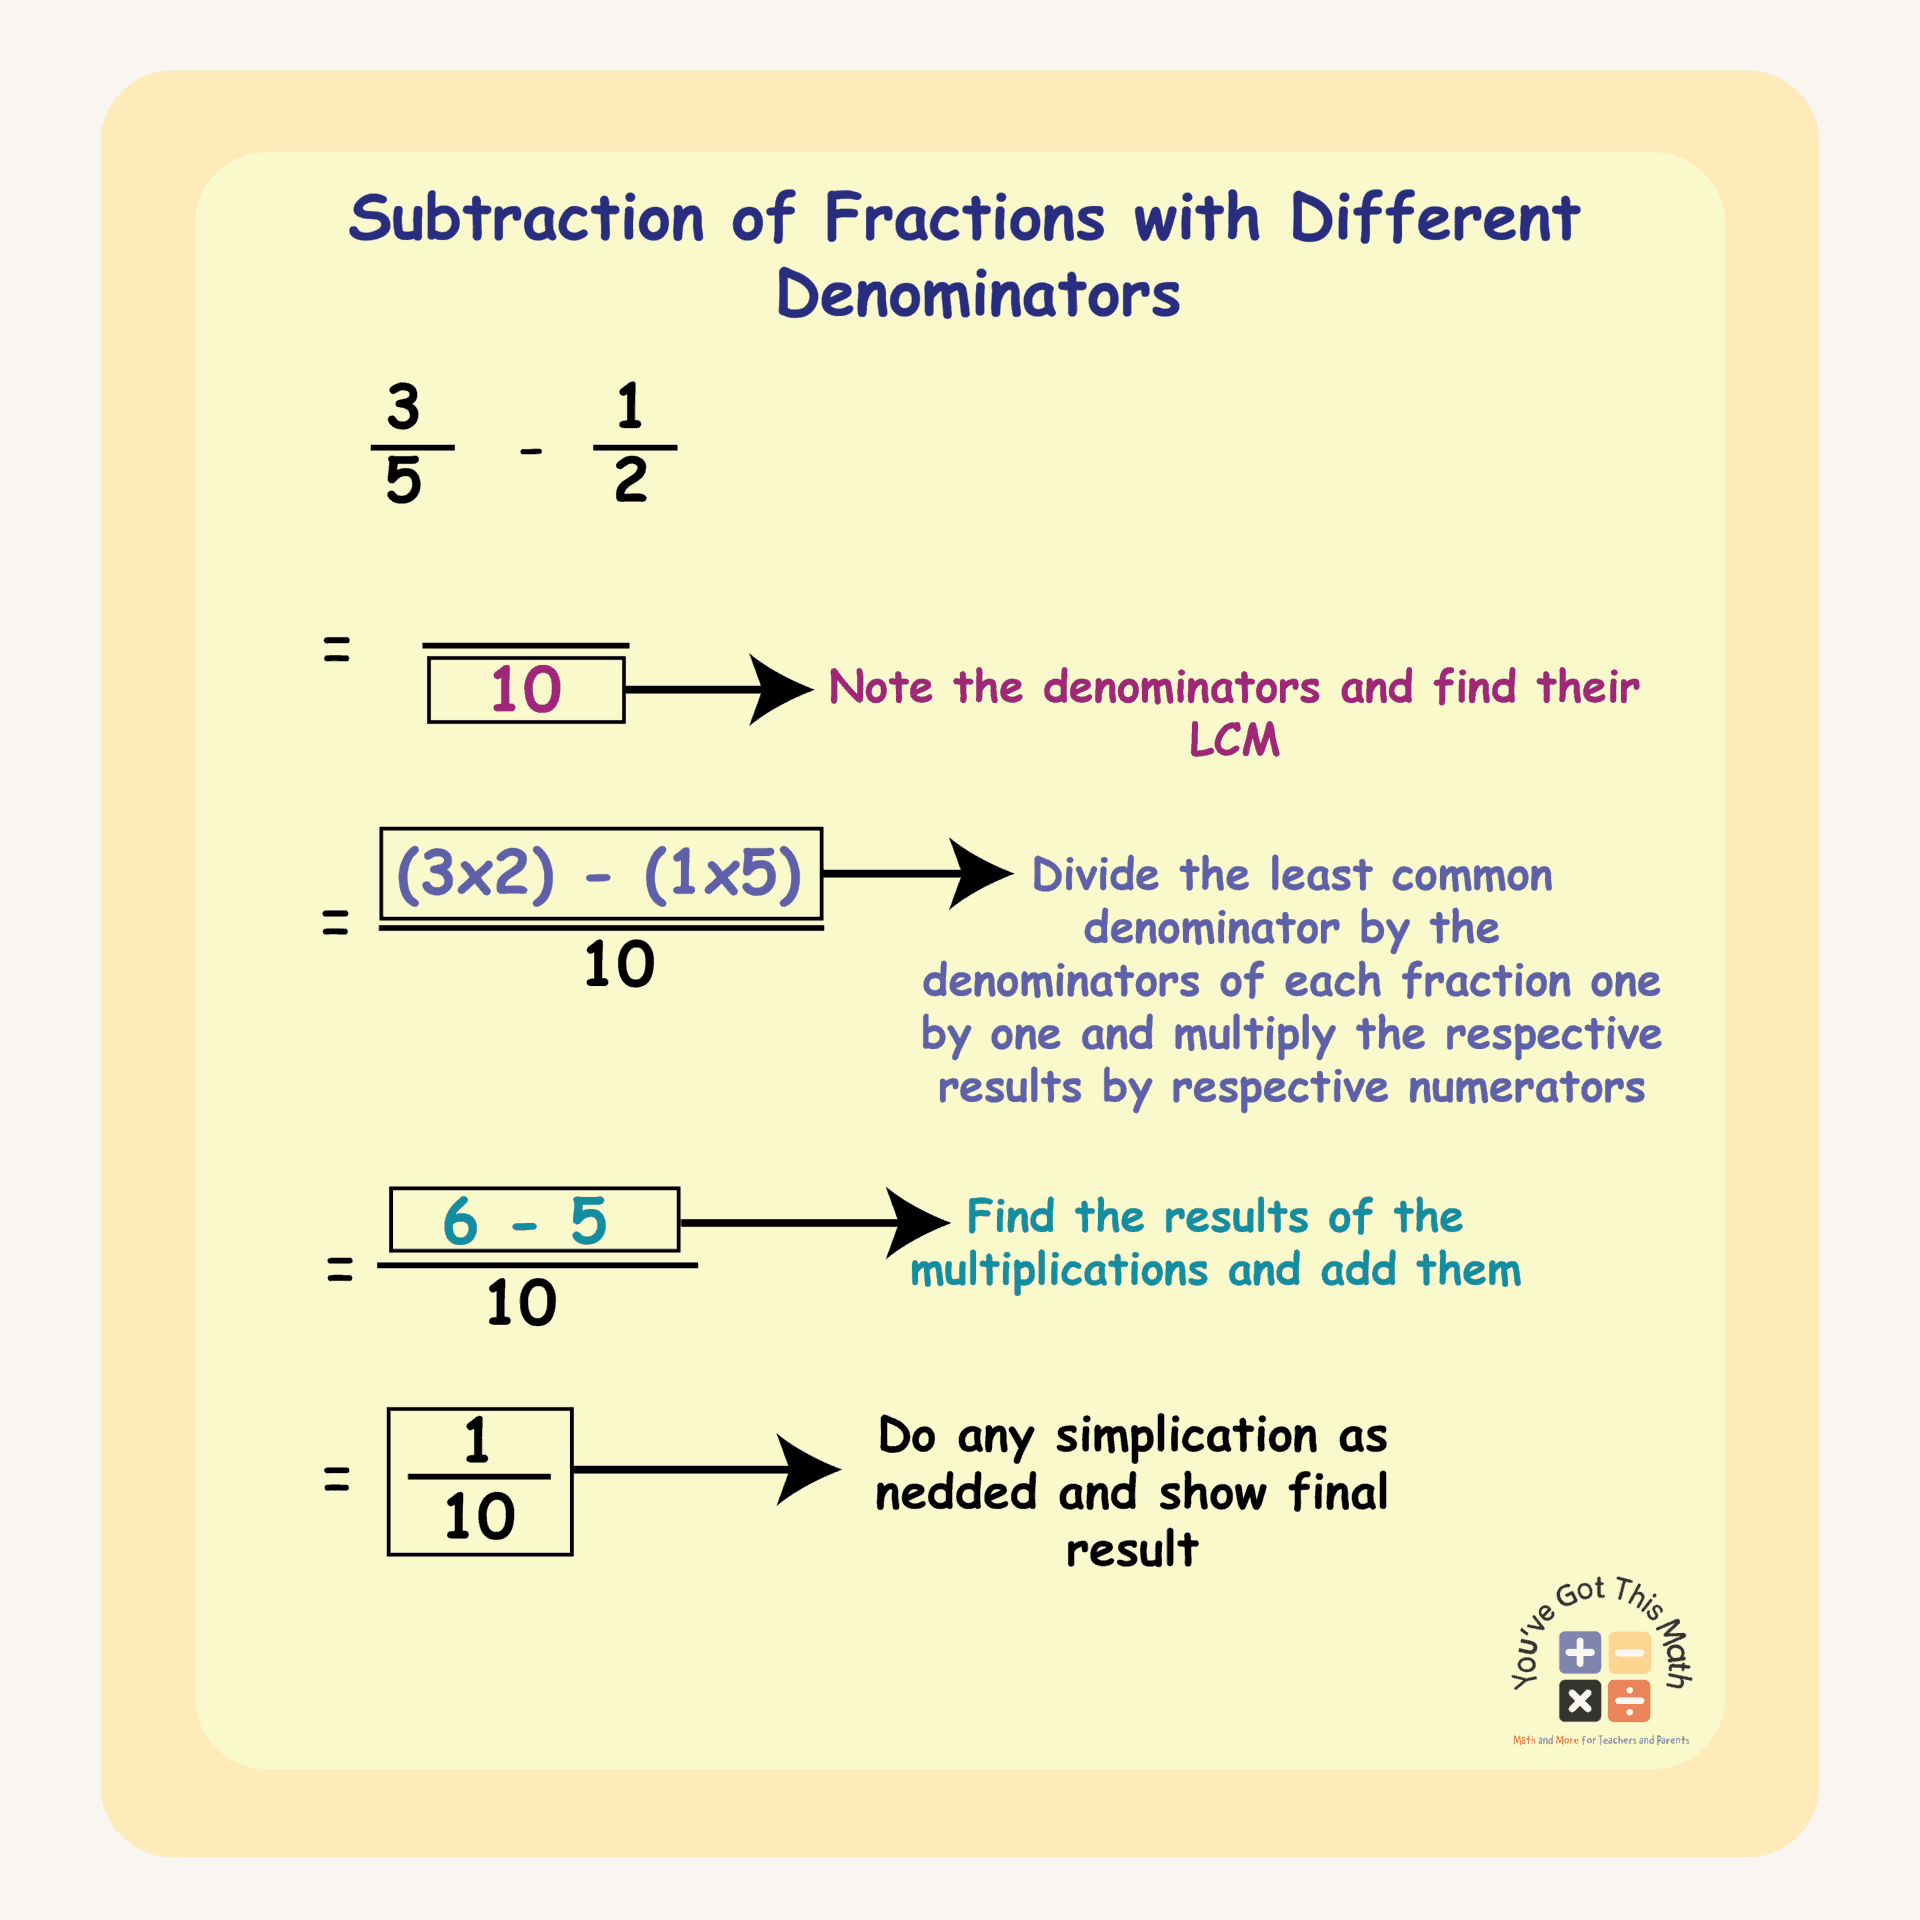 Subtraction of Fractions with Different Denominators